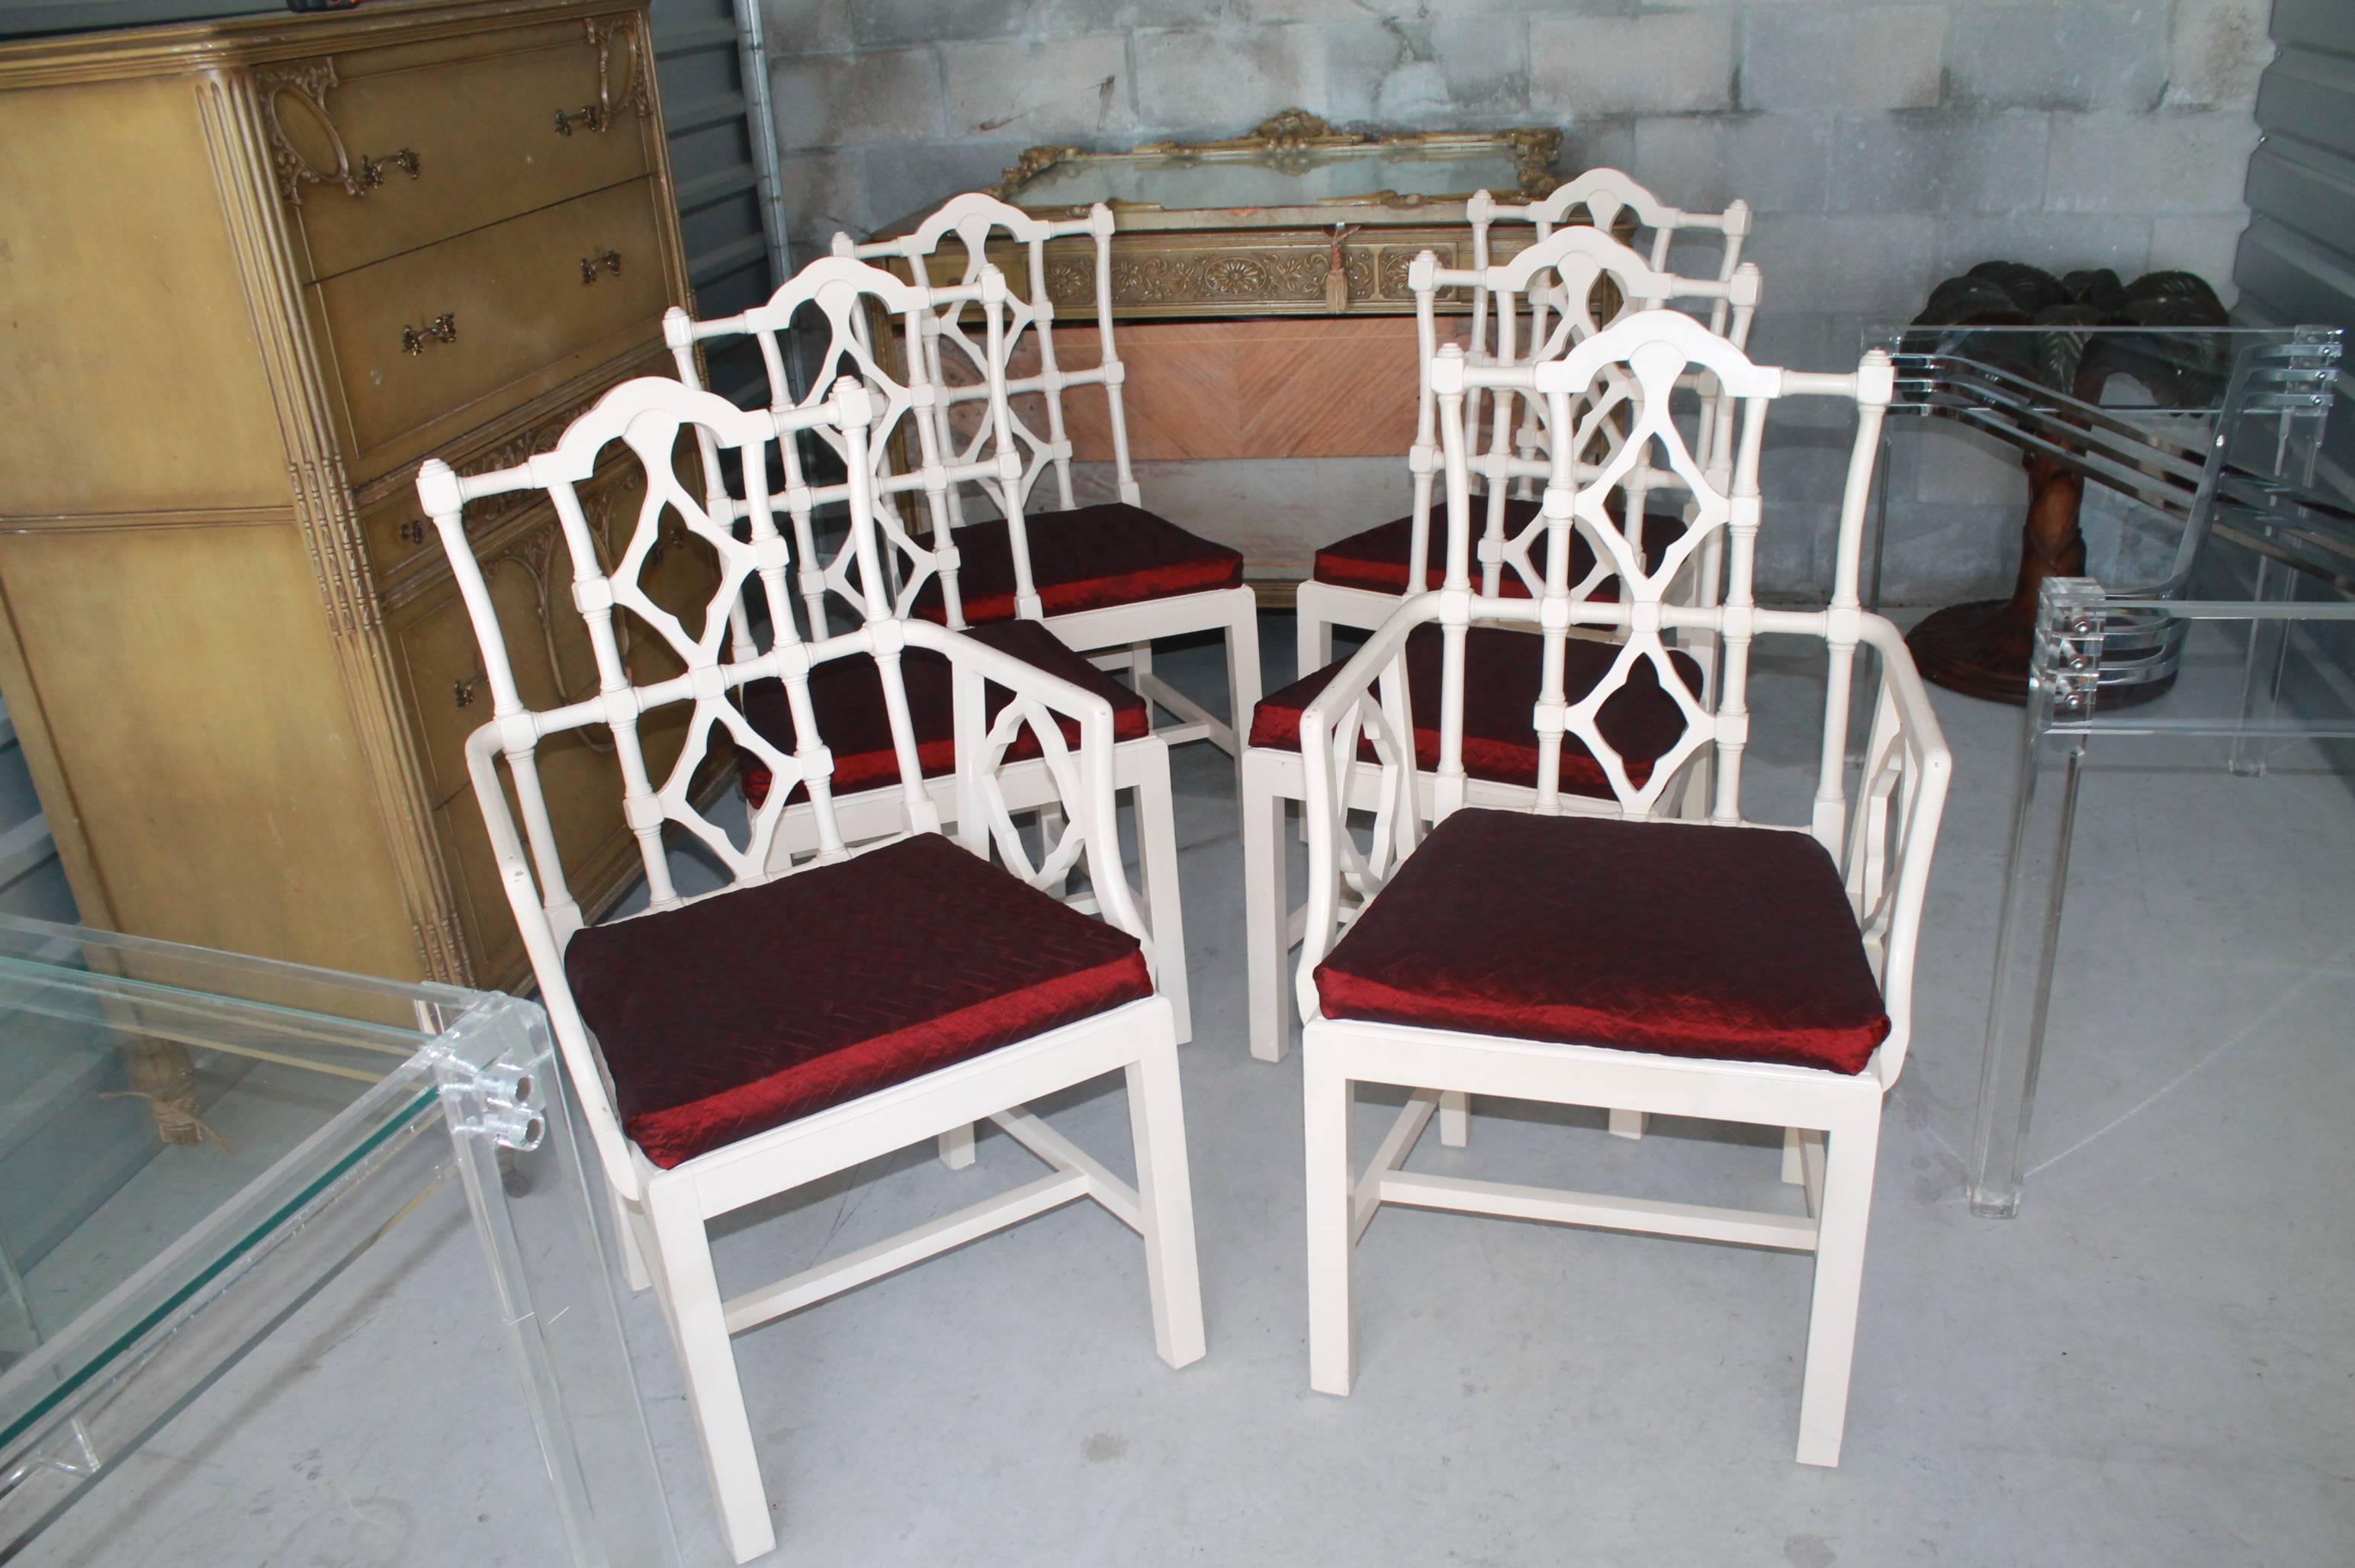 Set of 6 Vintage Hollywood Regency Fretwork Chinese chippendale dining chairs. This set included two armchairs and four side chairs. These will need to be recovered as the upholstery is original. The lacquered finish is also original and I recommend